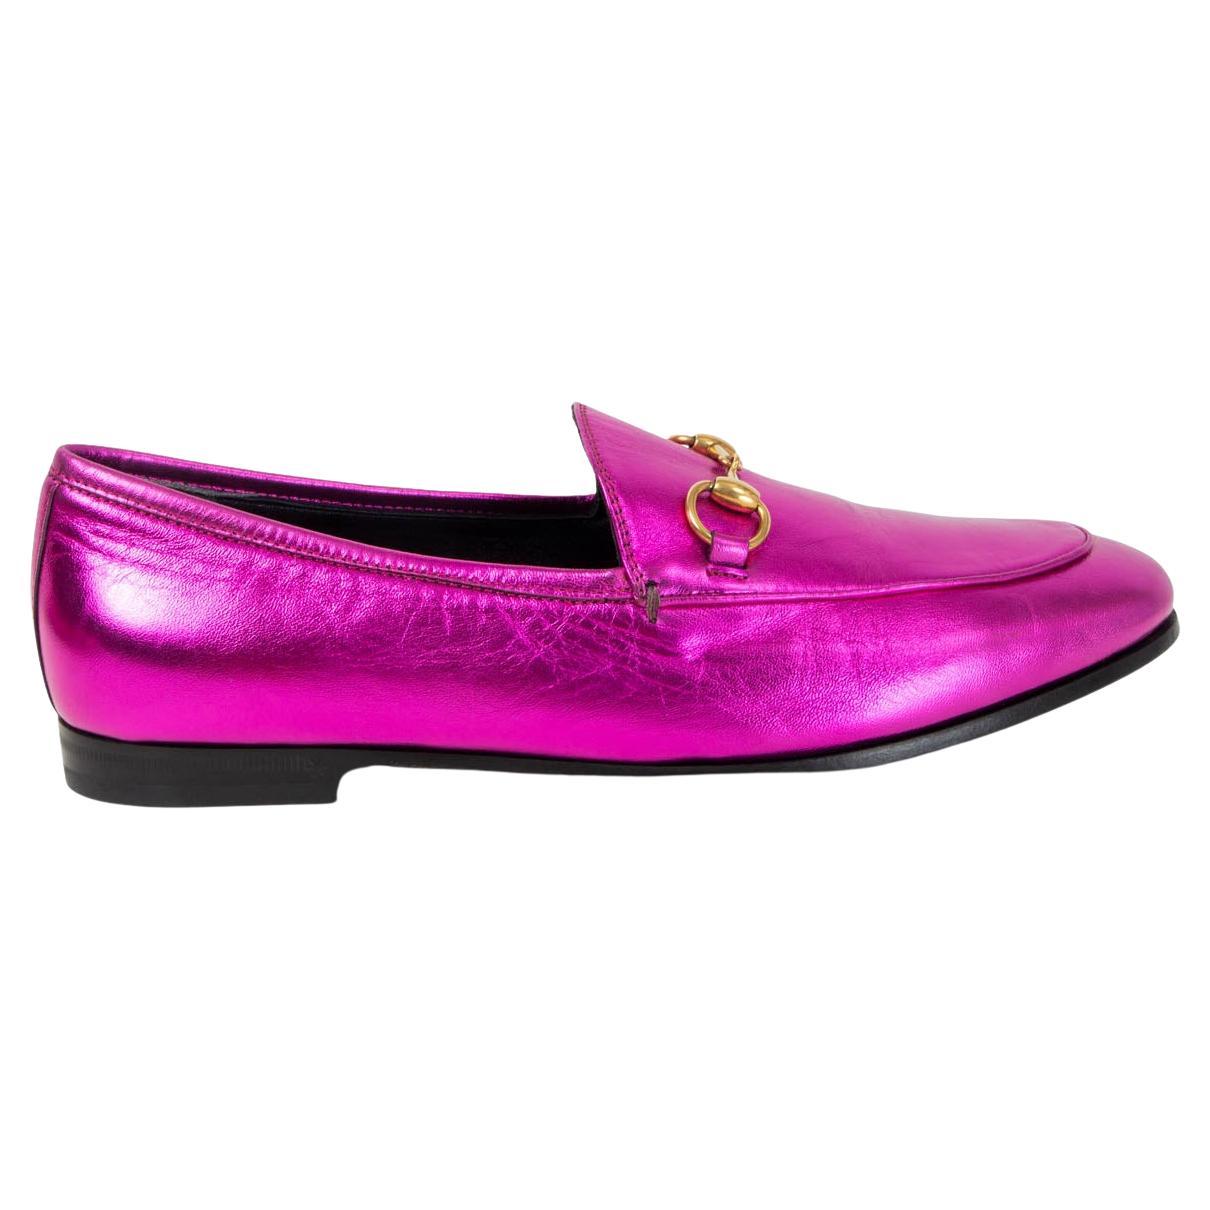 GUCCI metallic pink leather JORDAAN Loafers Flats Shoes 37.5